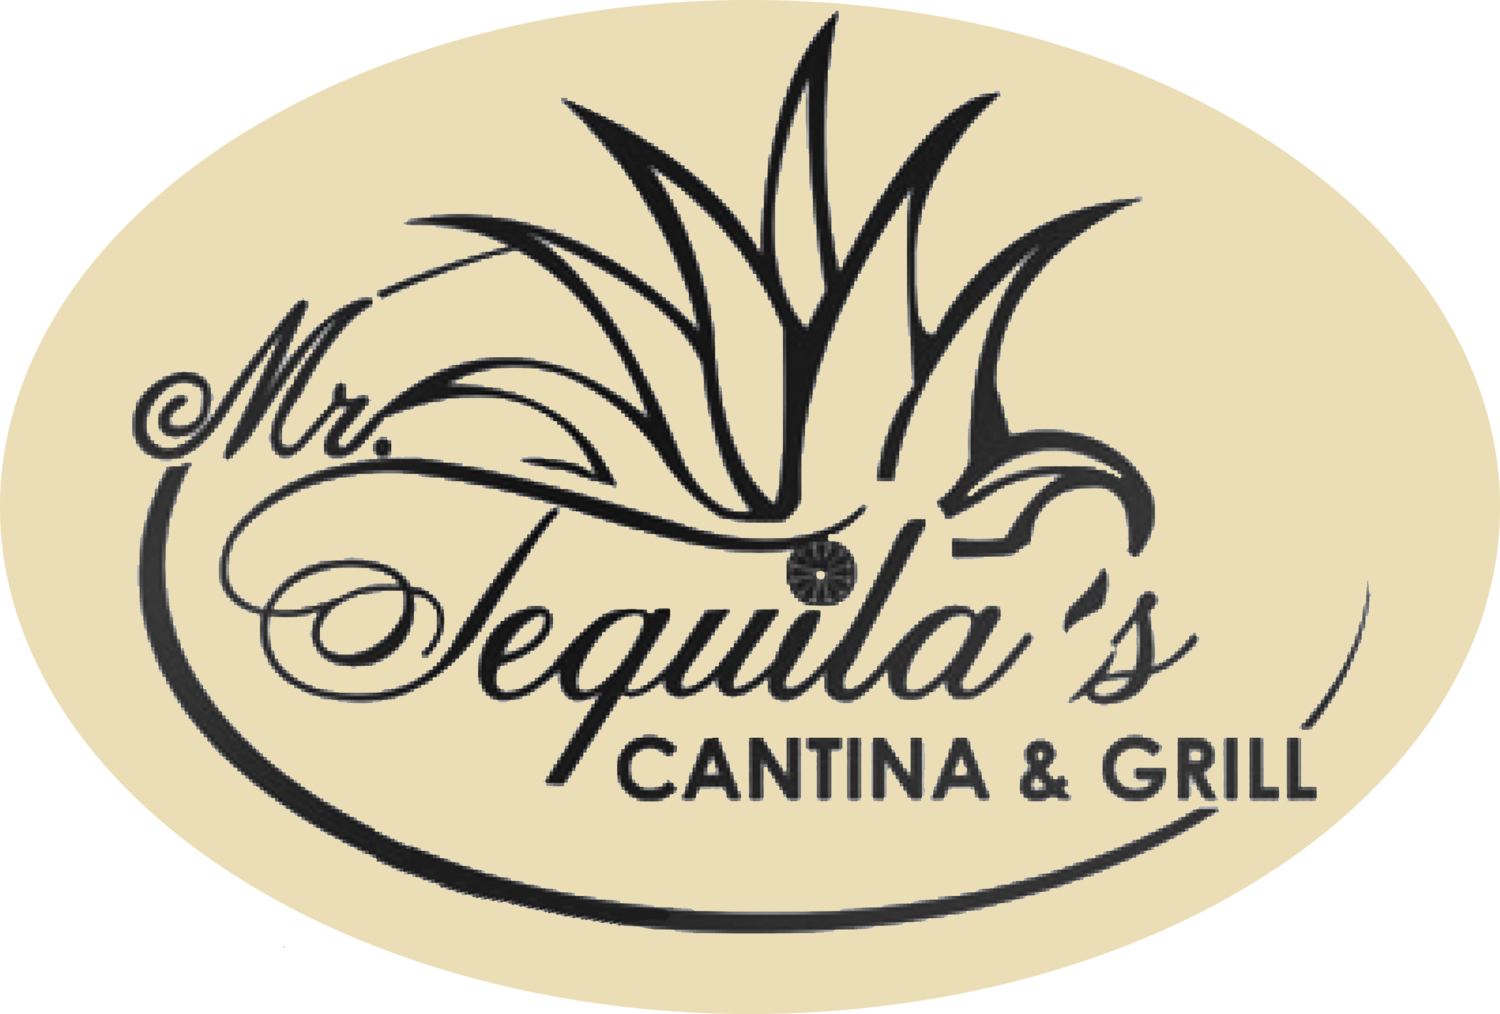 Mr. Tequila’s Cantina & Grill